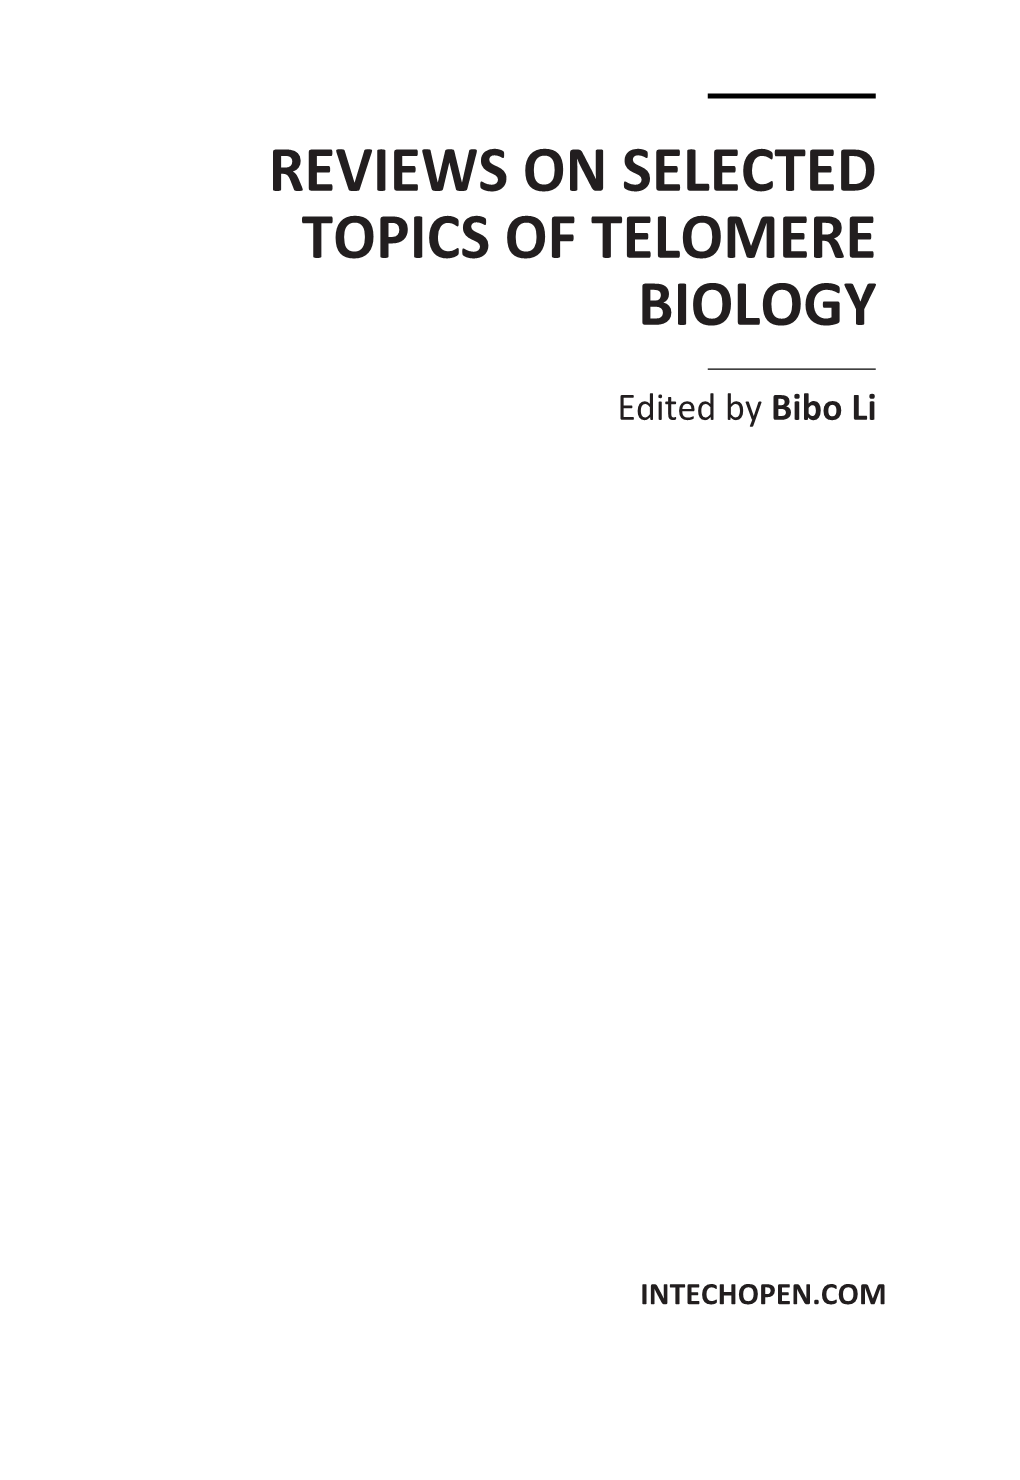 Reviews on Selected Topics of Telomere Biology